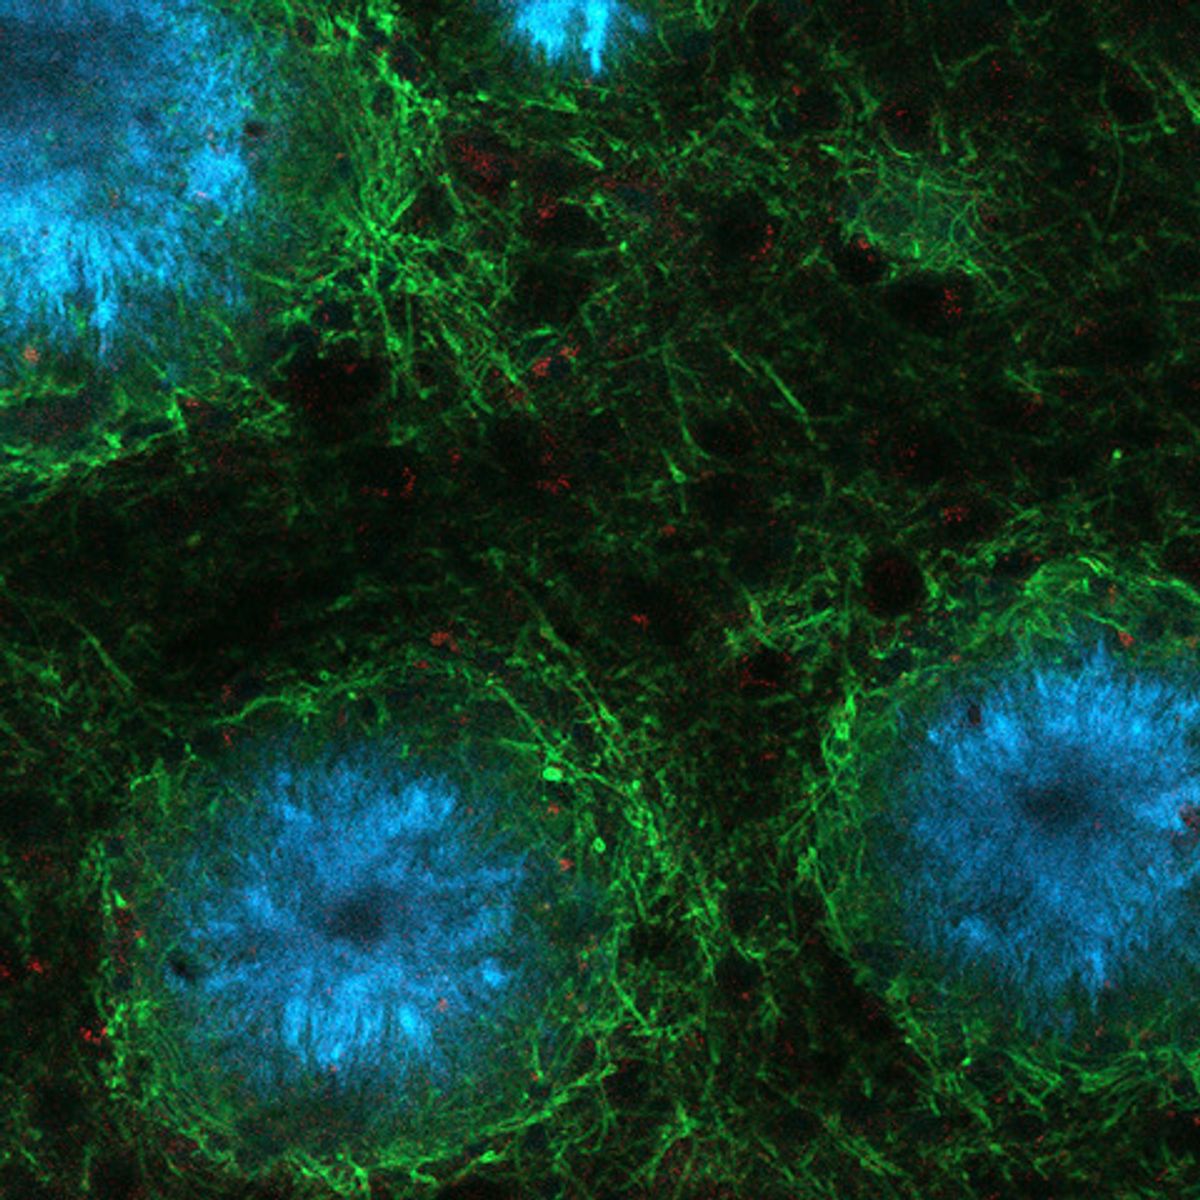 Fluorescence microscopy image of blue amyloid plaques and green microglia in a mouse brain tissue.